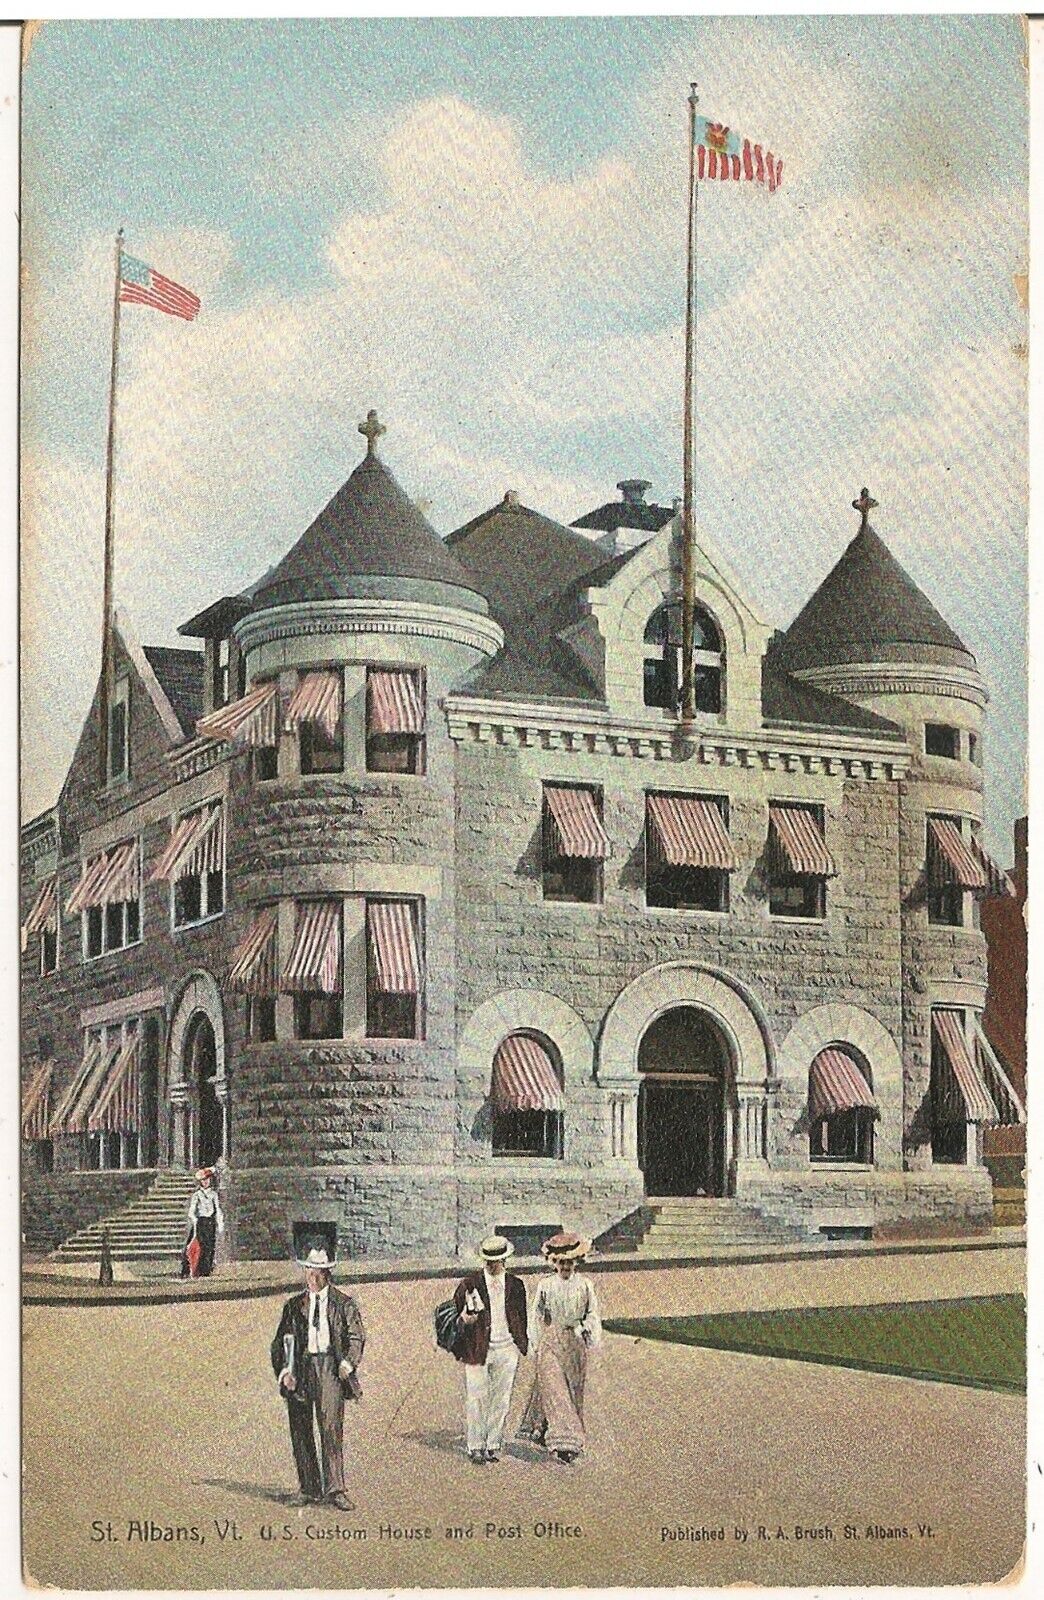 U.S. Custom House and Post Office in St. Albans VT Postcard 1909